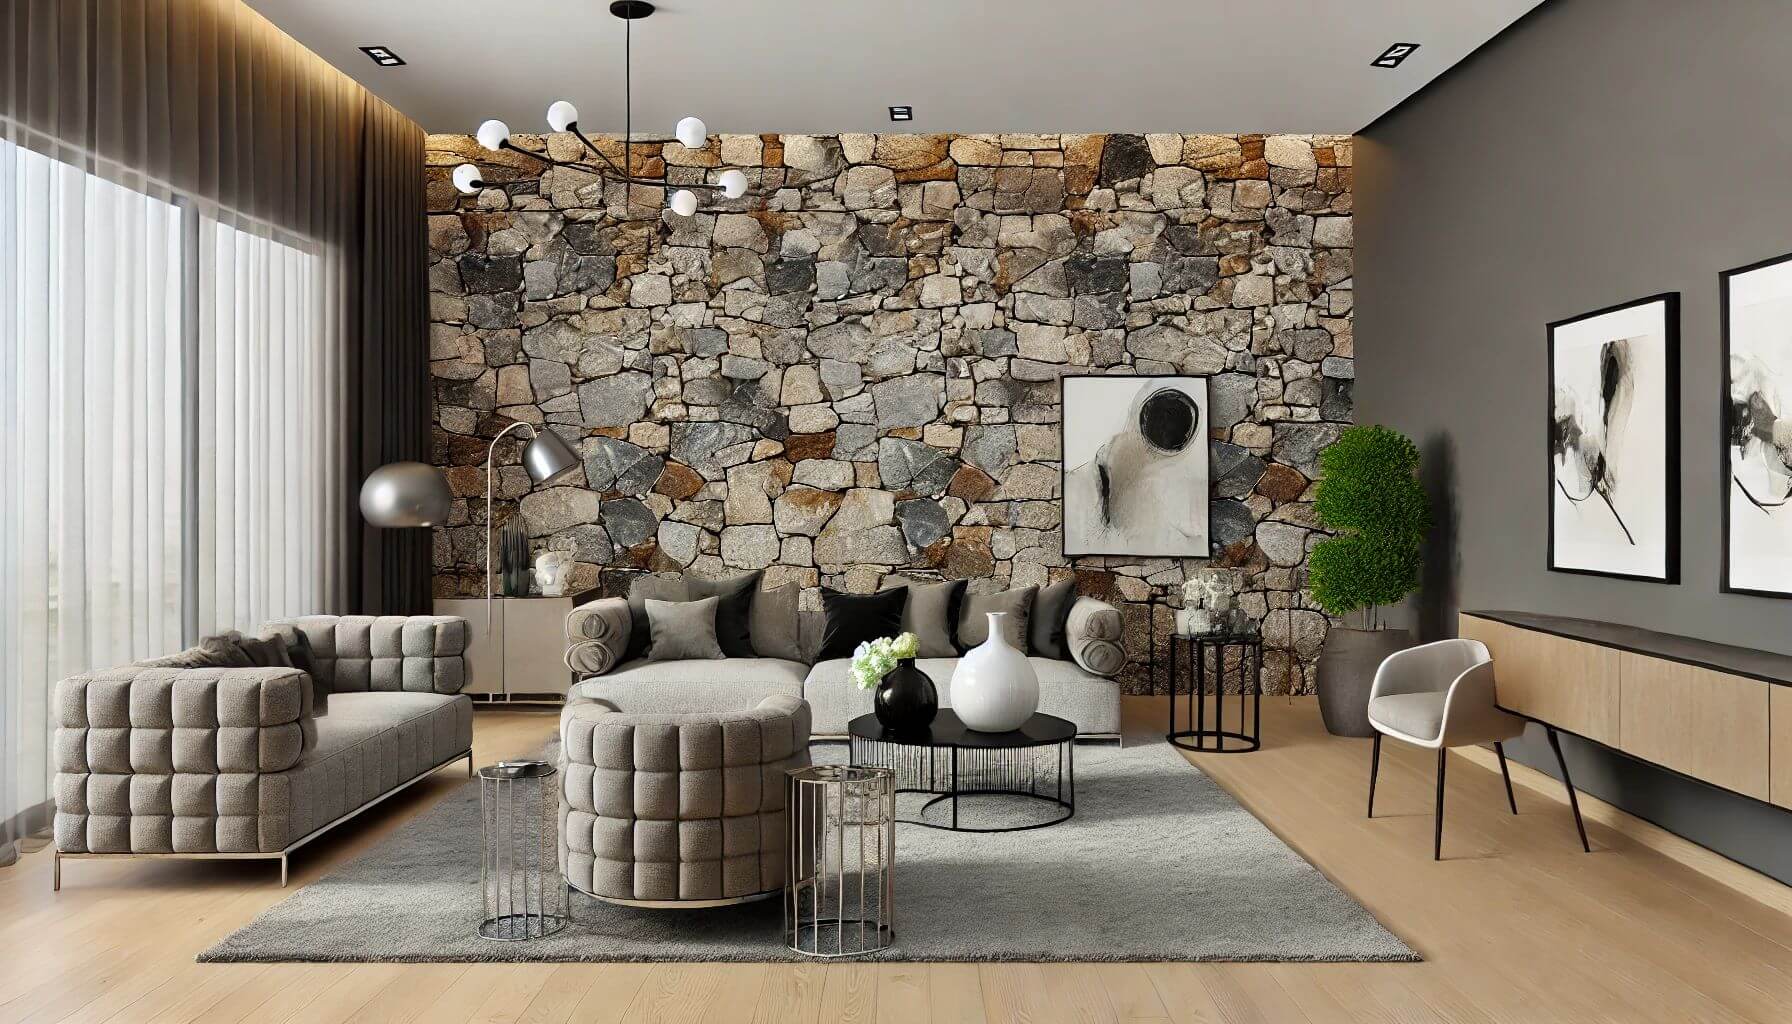 Interior stone wall design for living room: how to elevate your space